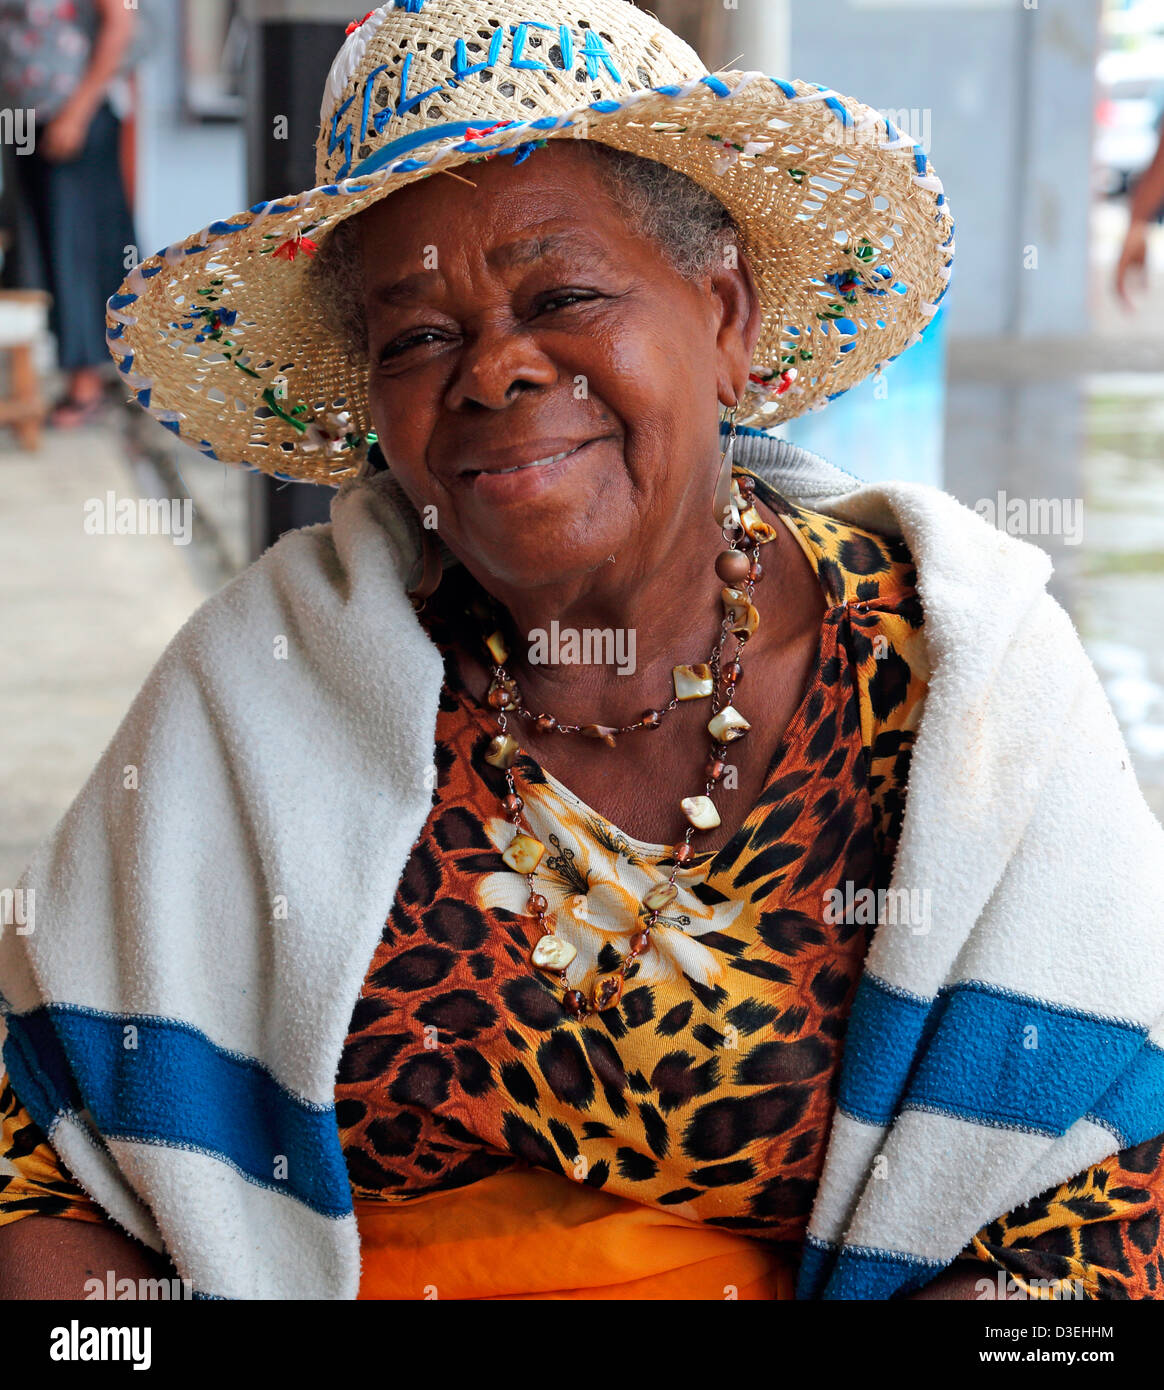 LADY IN MARKET,CASTRIES,ST.LUCIA Stock Photo